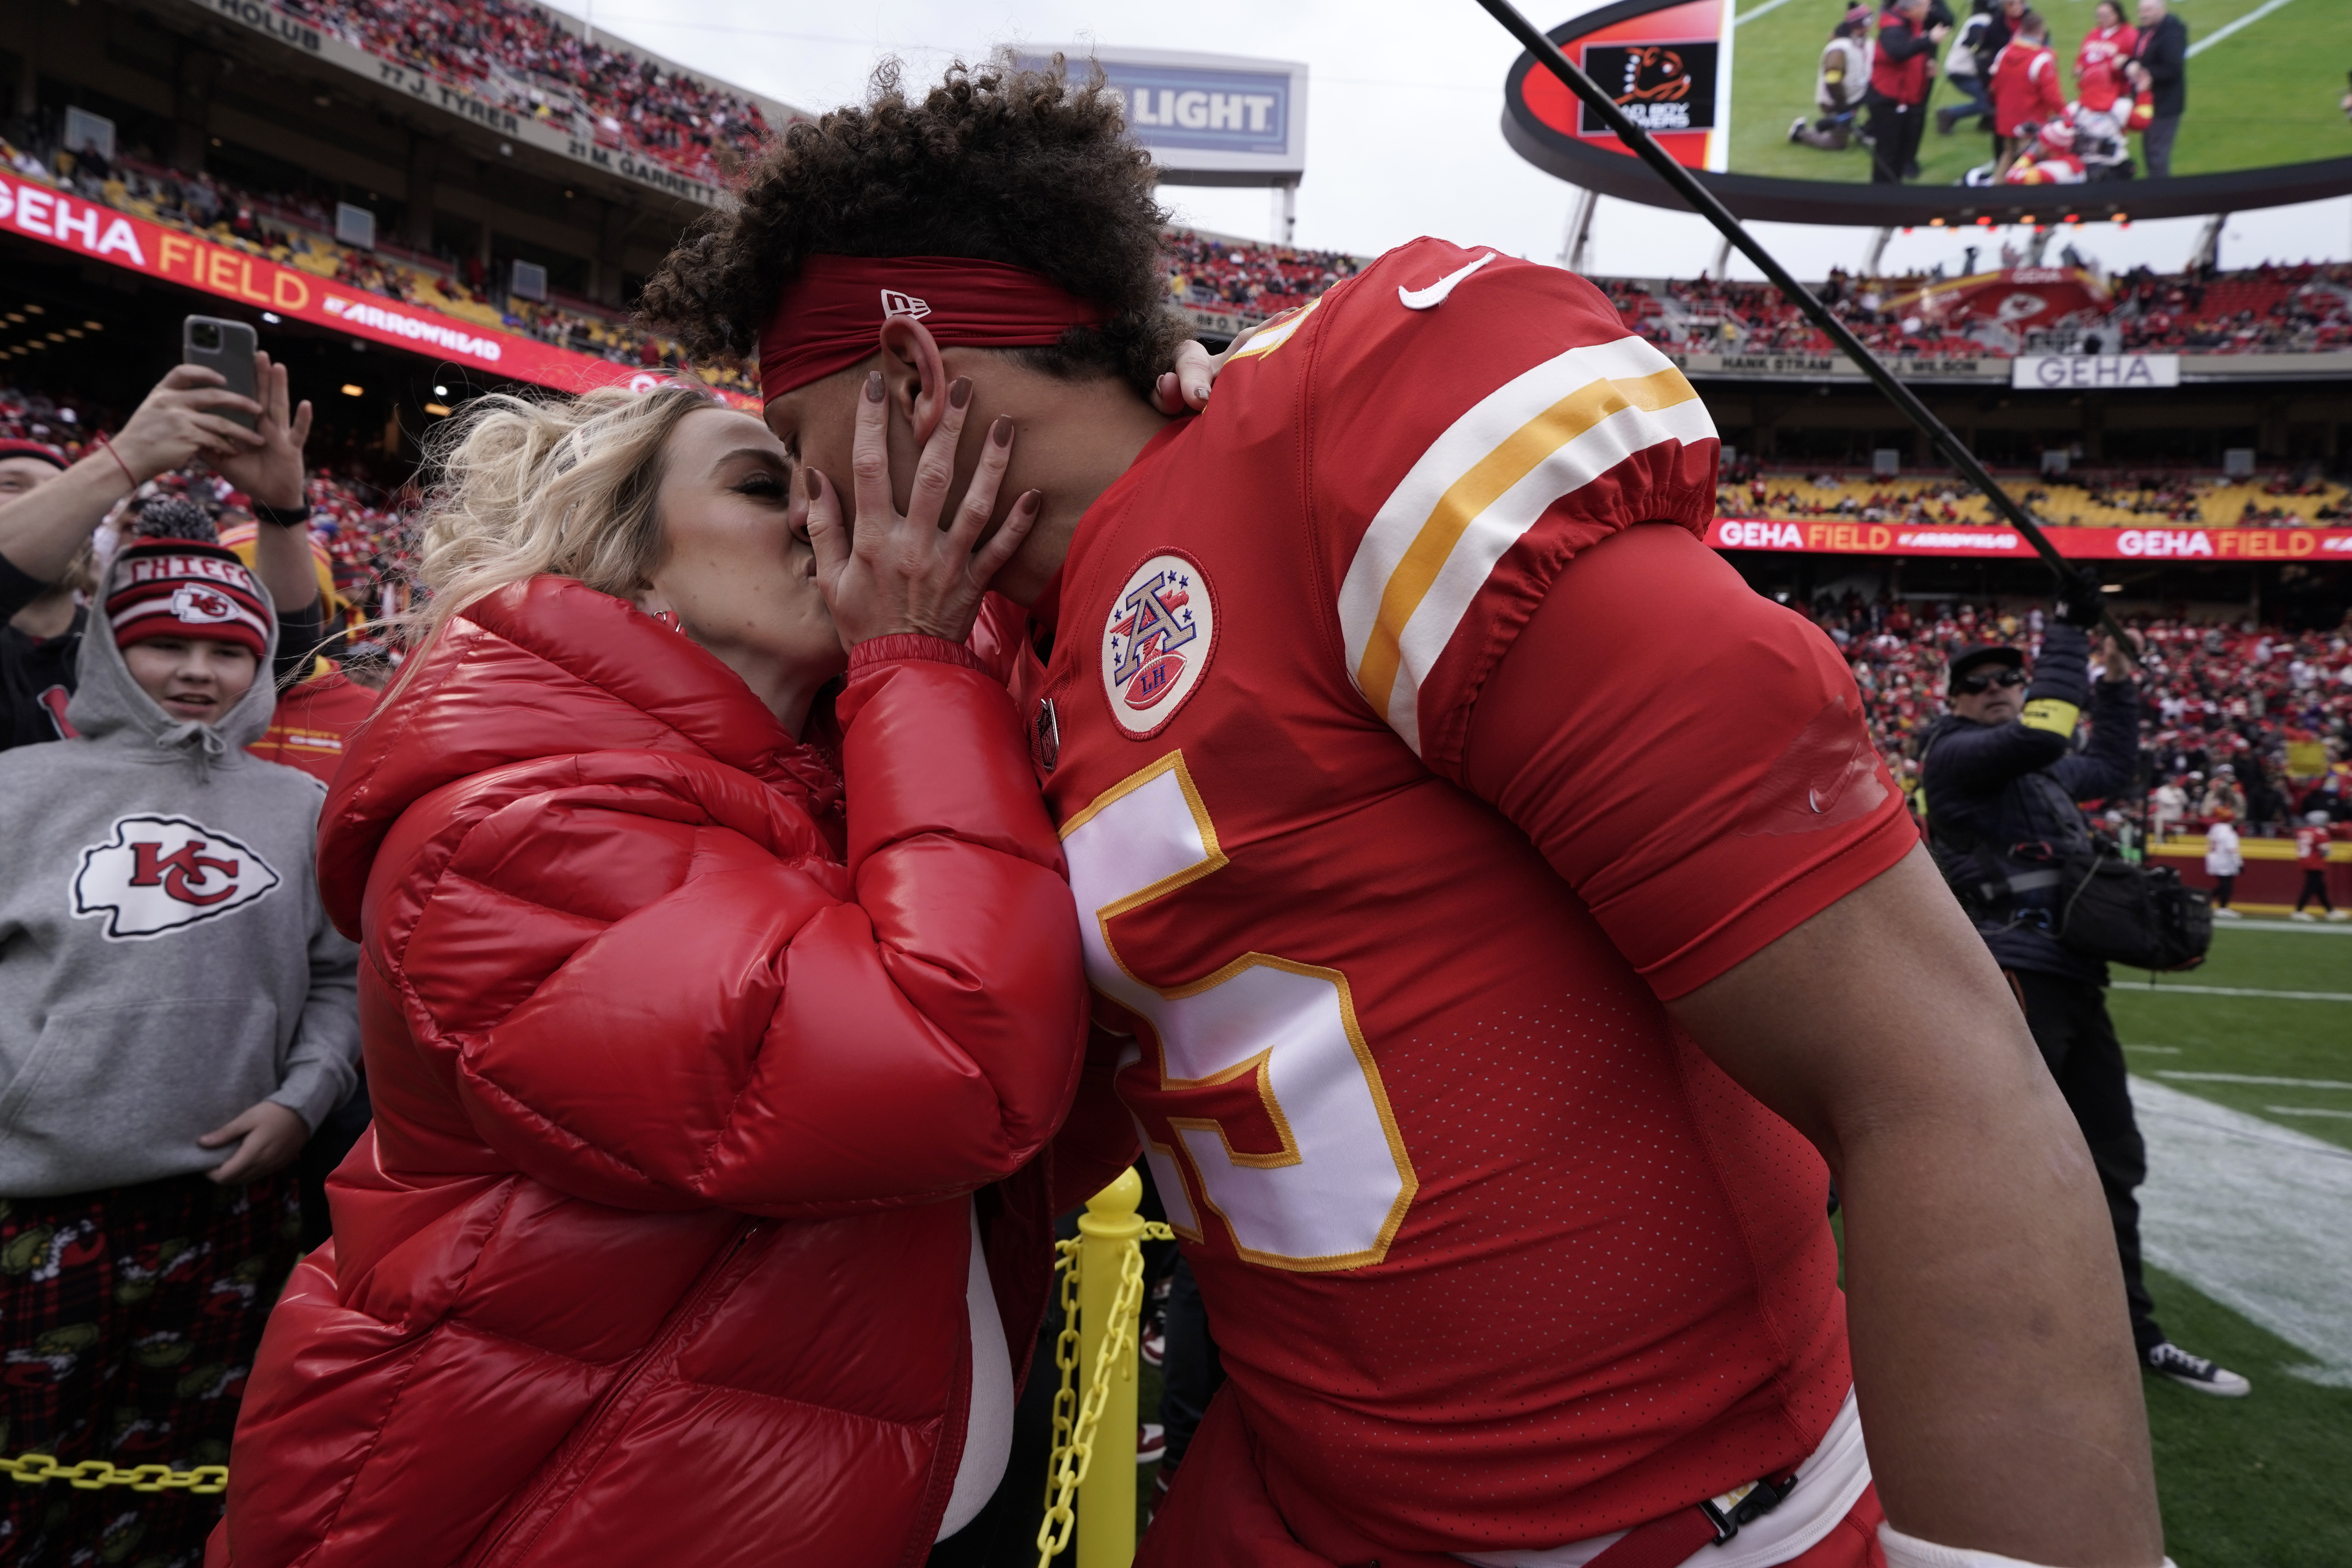 Patrick and Brittany Mahomes Bring Bronze to His 1st NFL Game